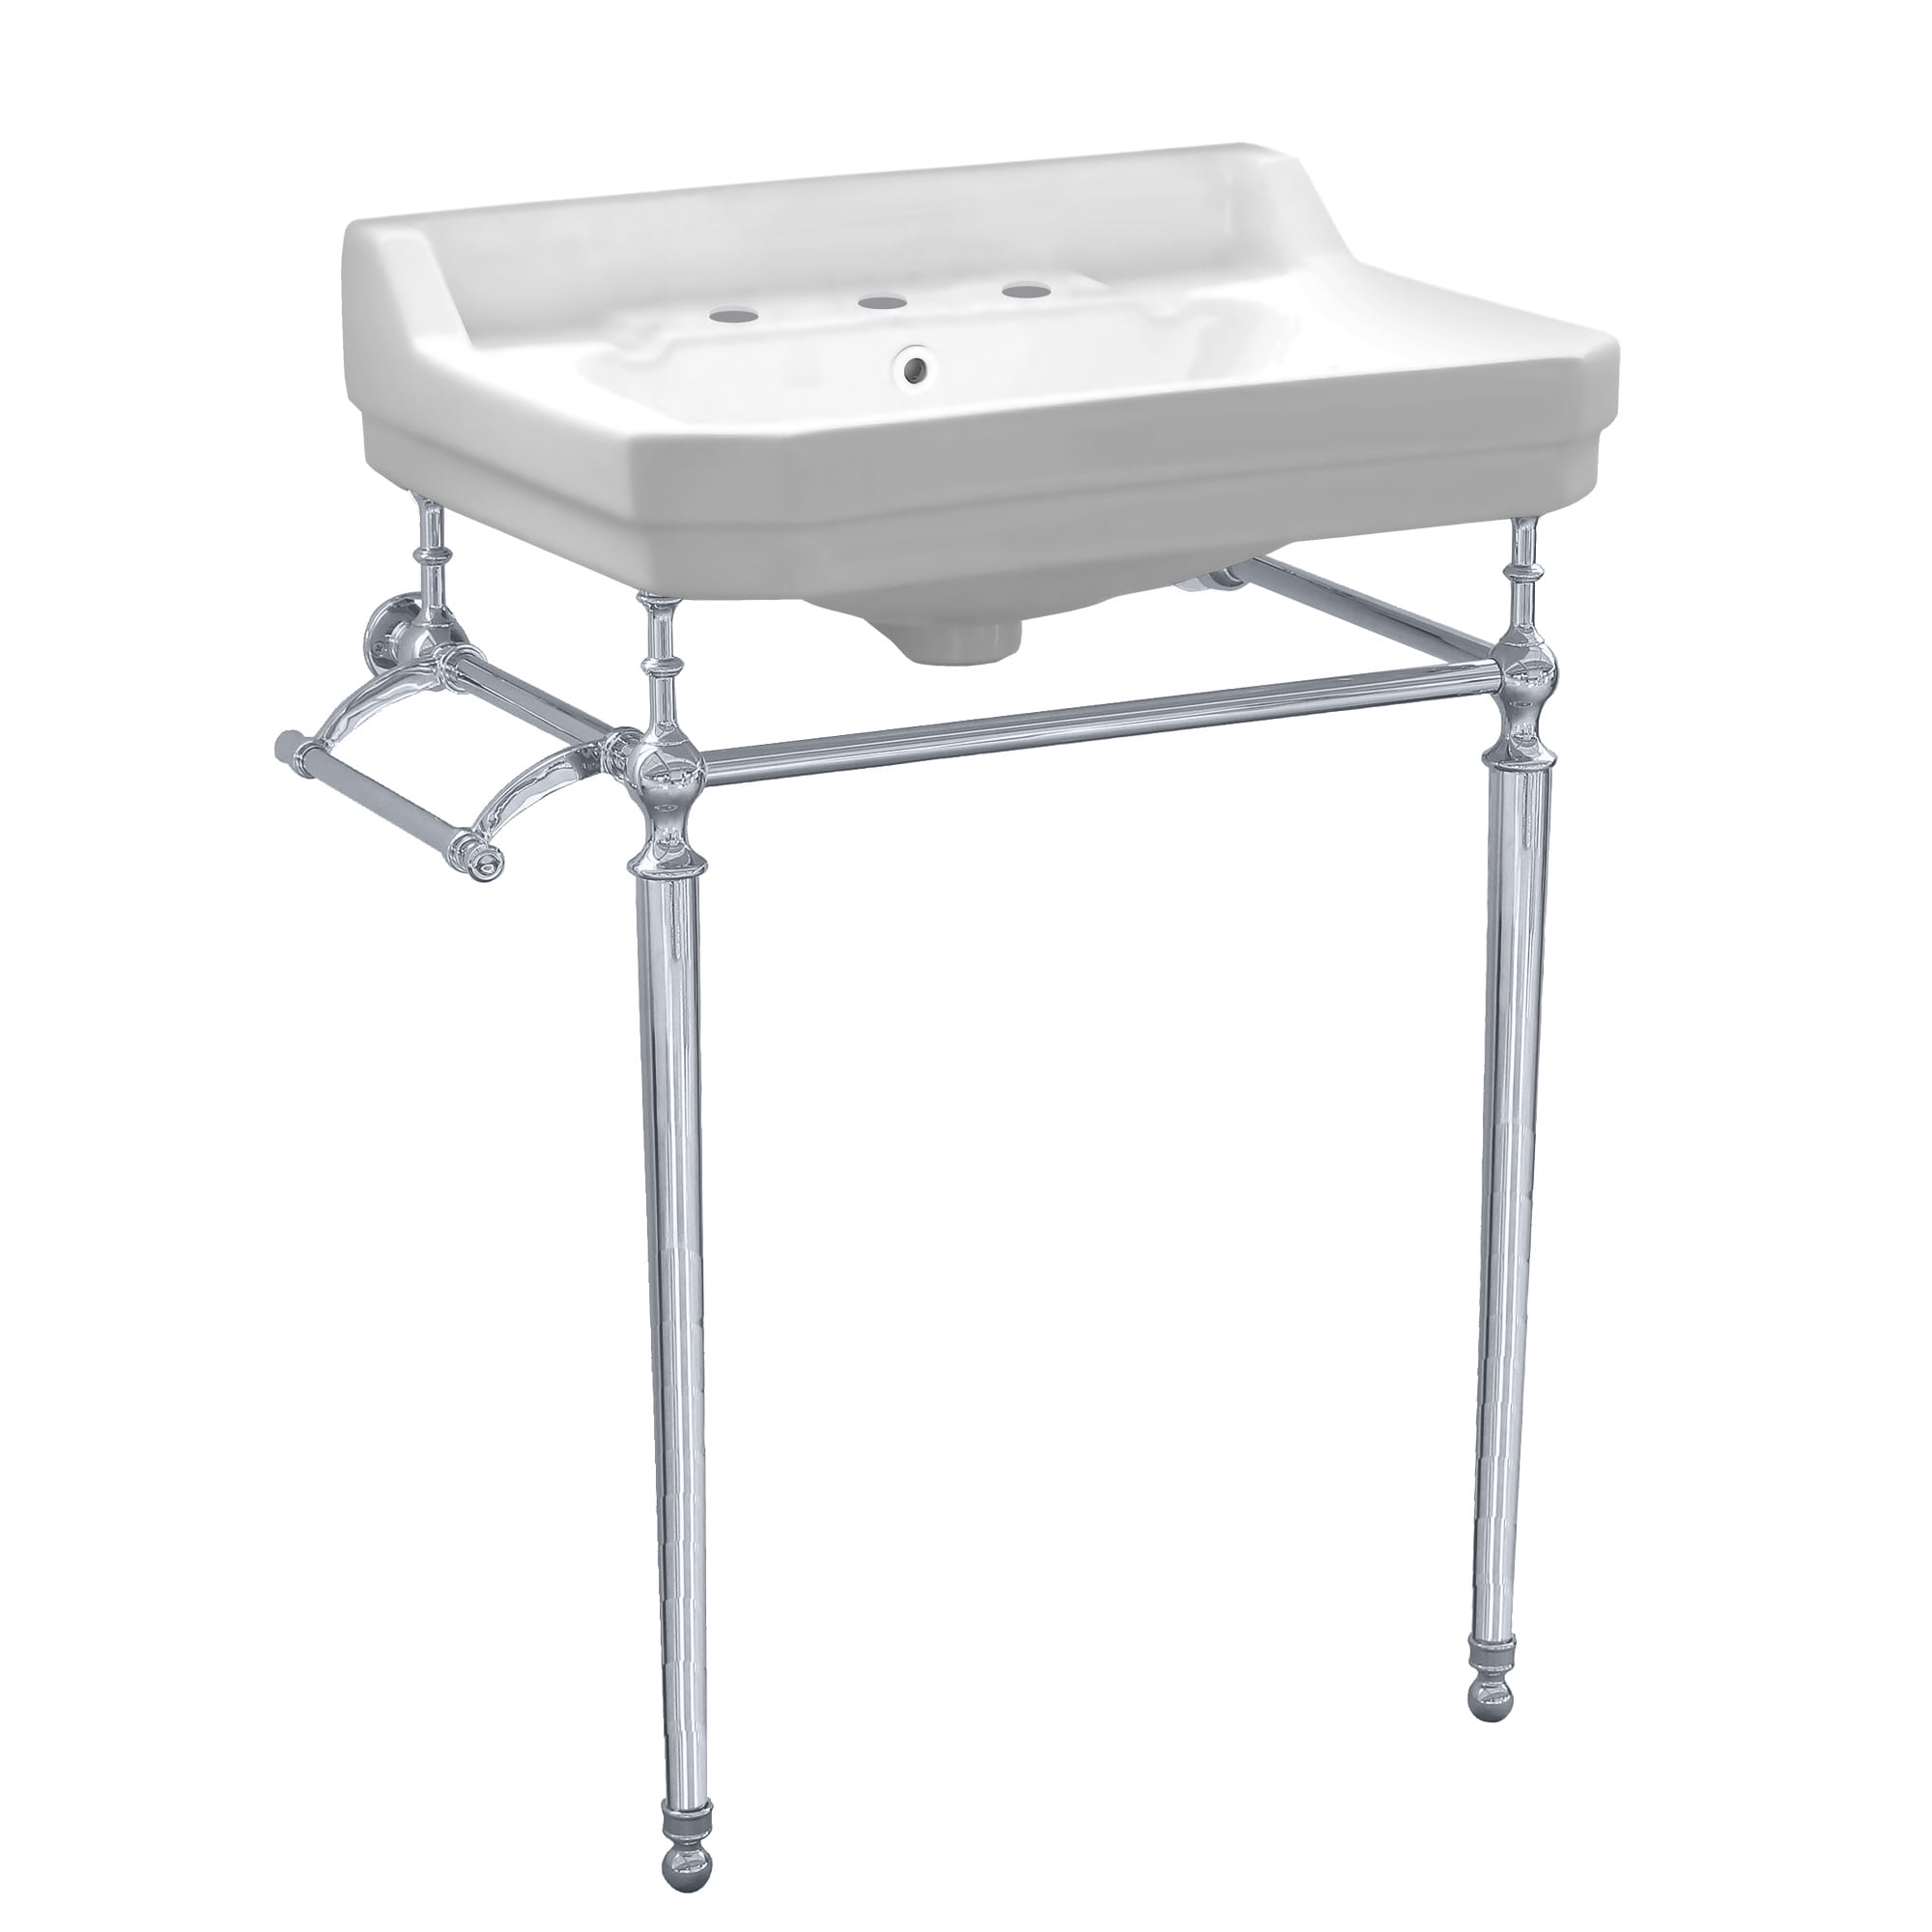 Whv024-l33-3h-c Victoriahaus Console With Integrated Rectangular Bowl & Three-hole - Polished Chrome